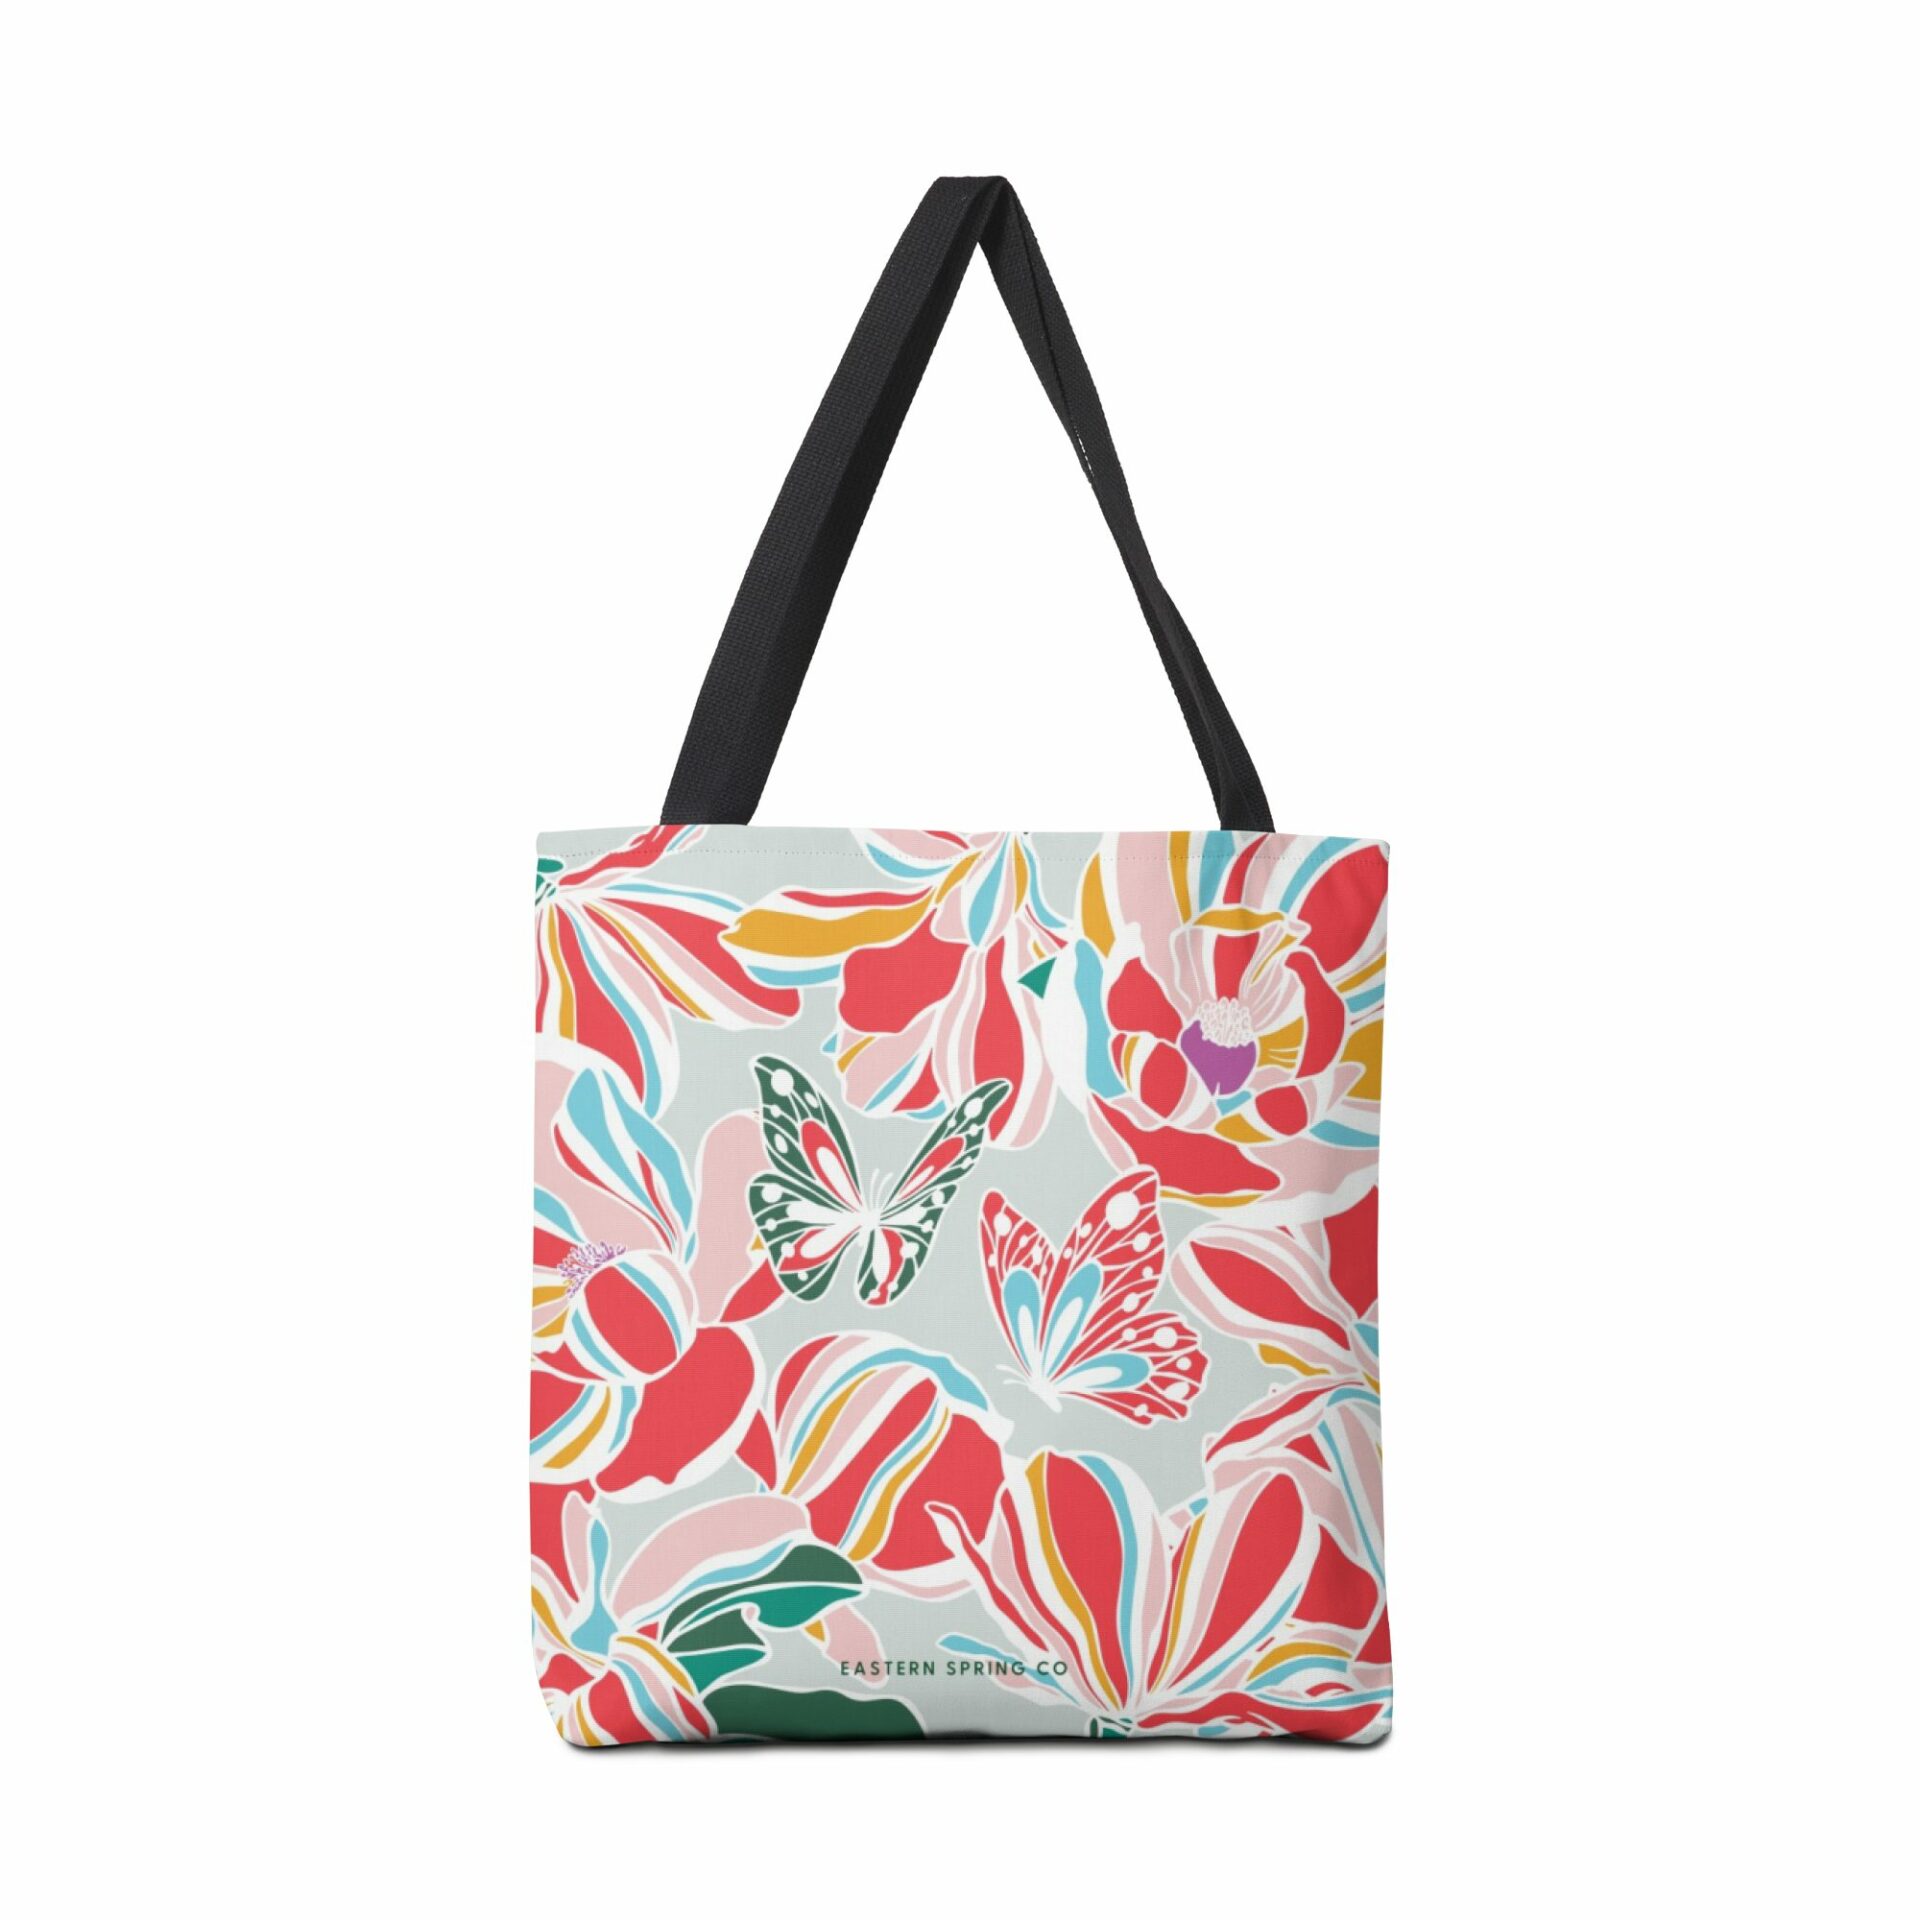 THE MAGNOLIAS AND BUTTERFLIES, tote bag